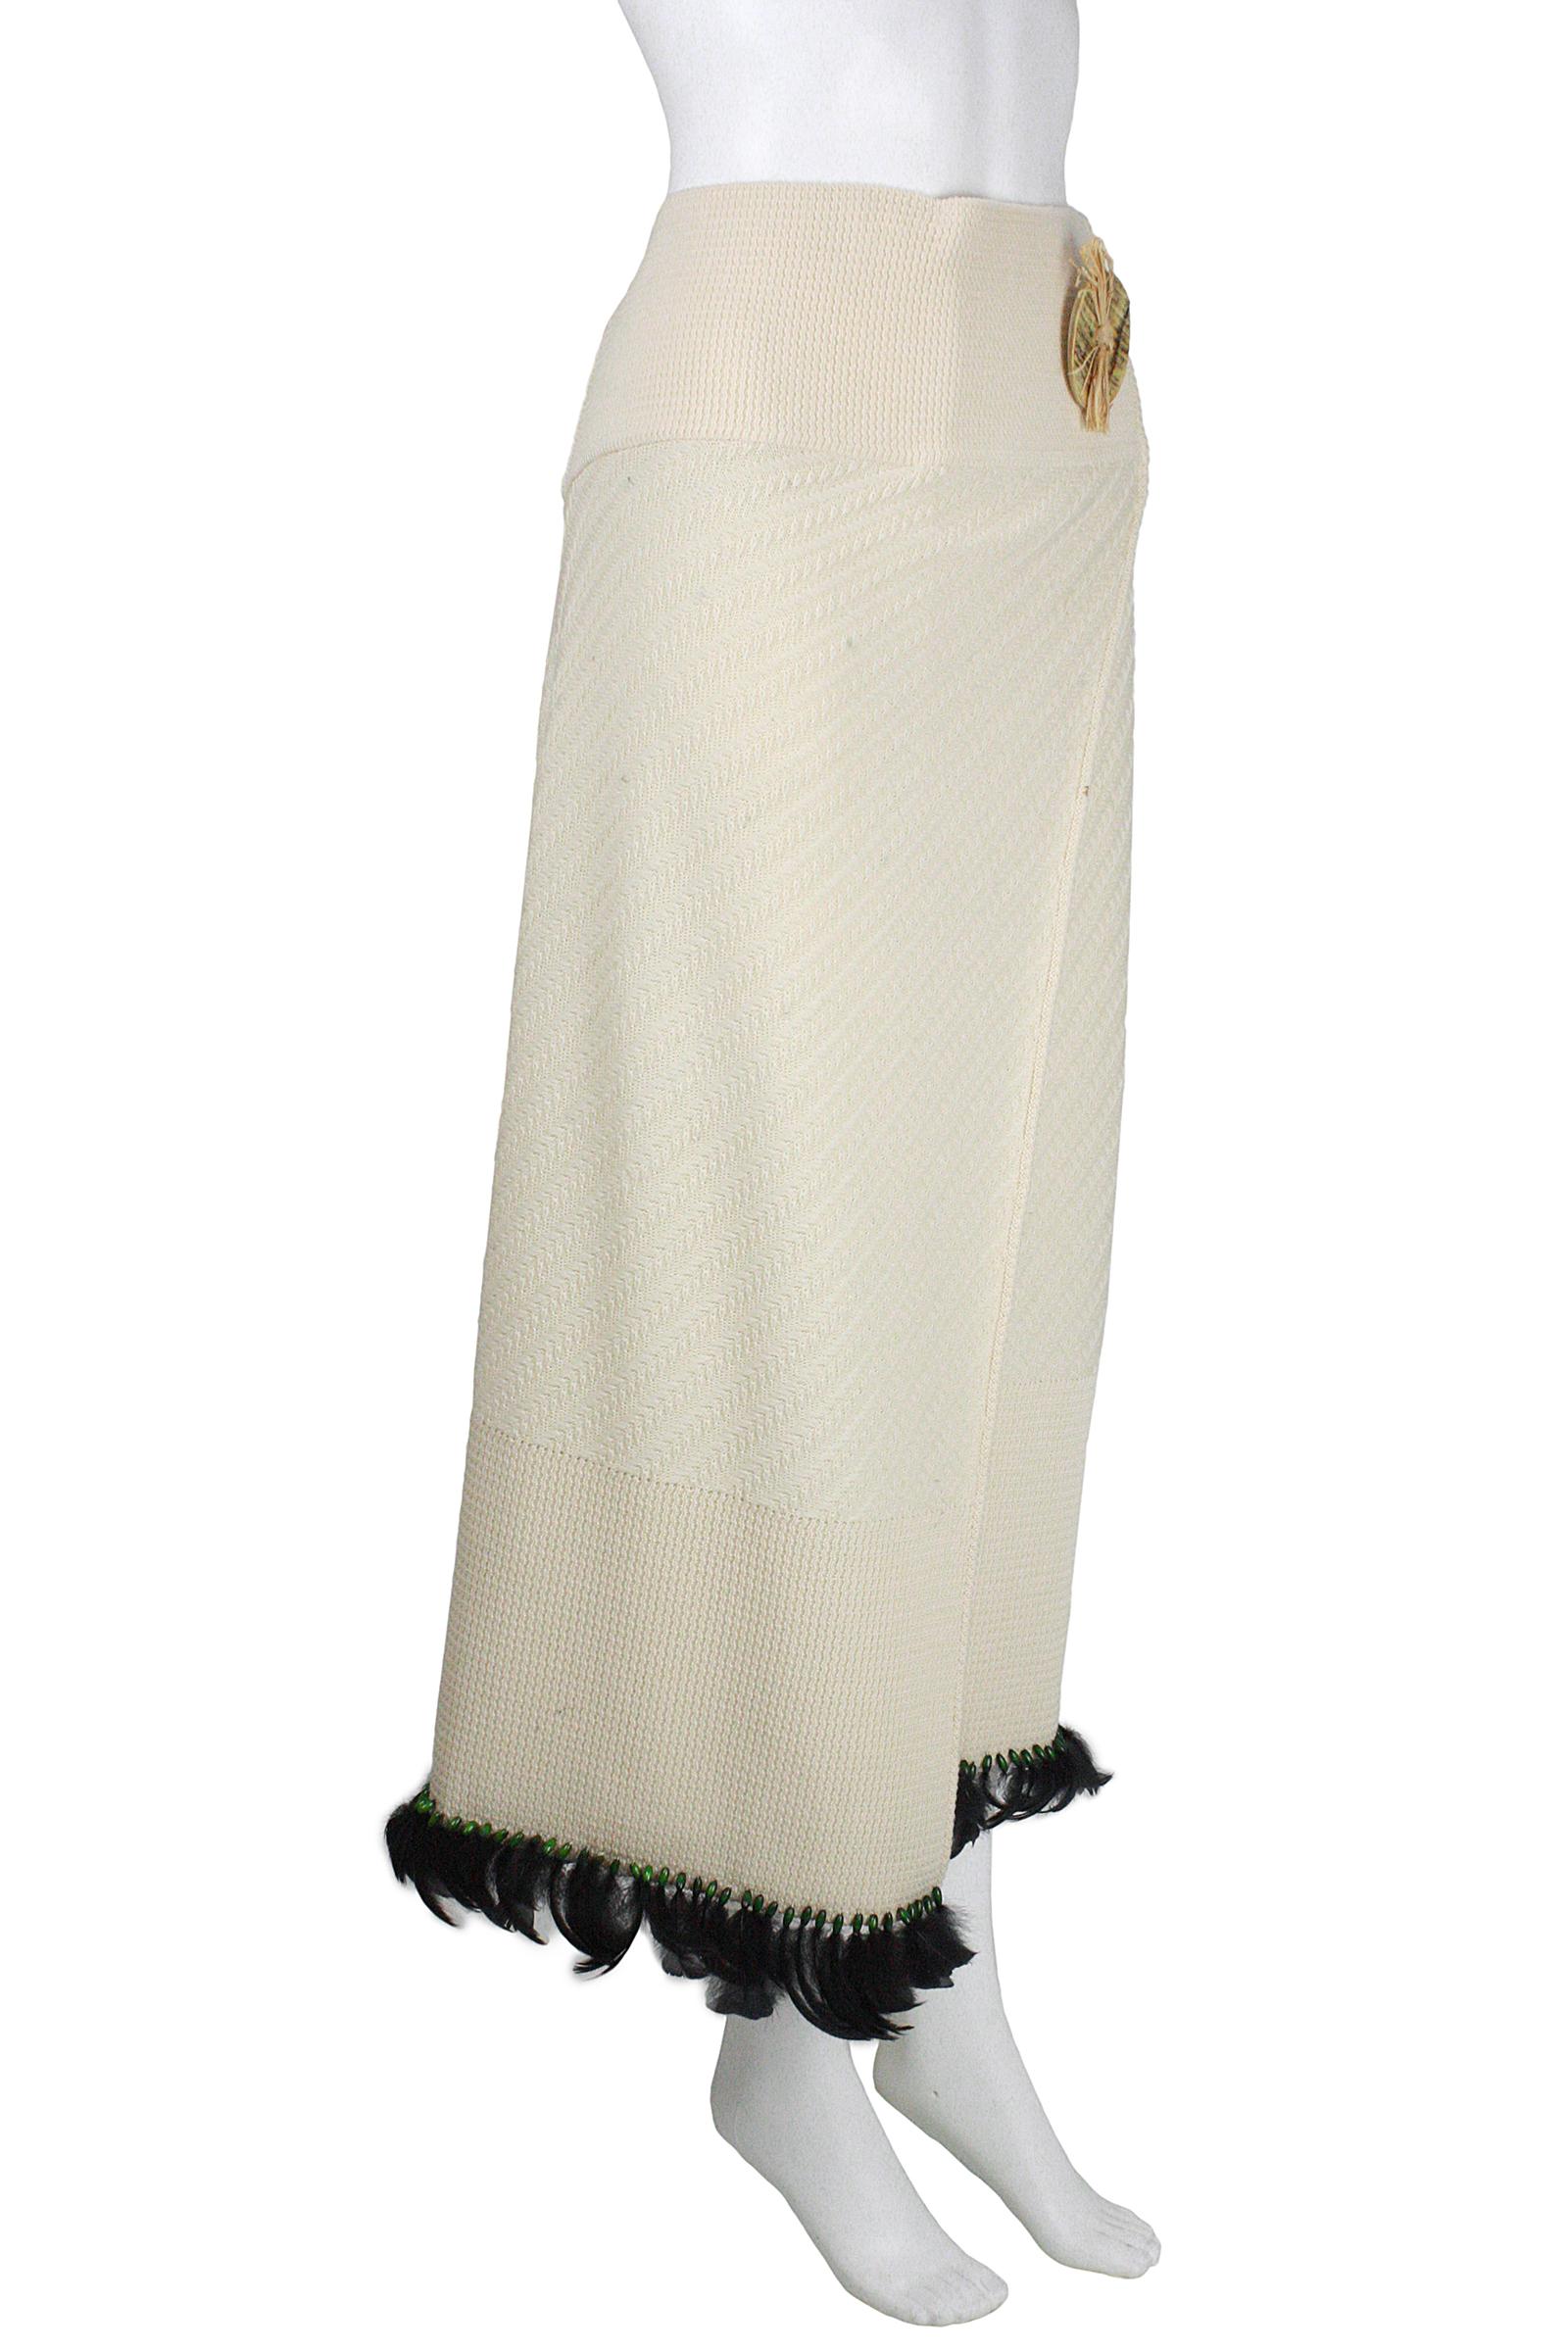 1990s John Galliano Cream Knit Wrap Skirt with Green Beads and Black Feathers In Good Condition In Los Angeles, CA